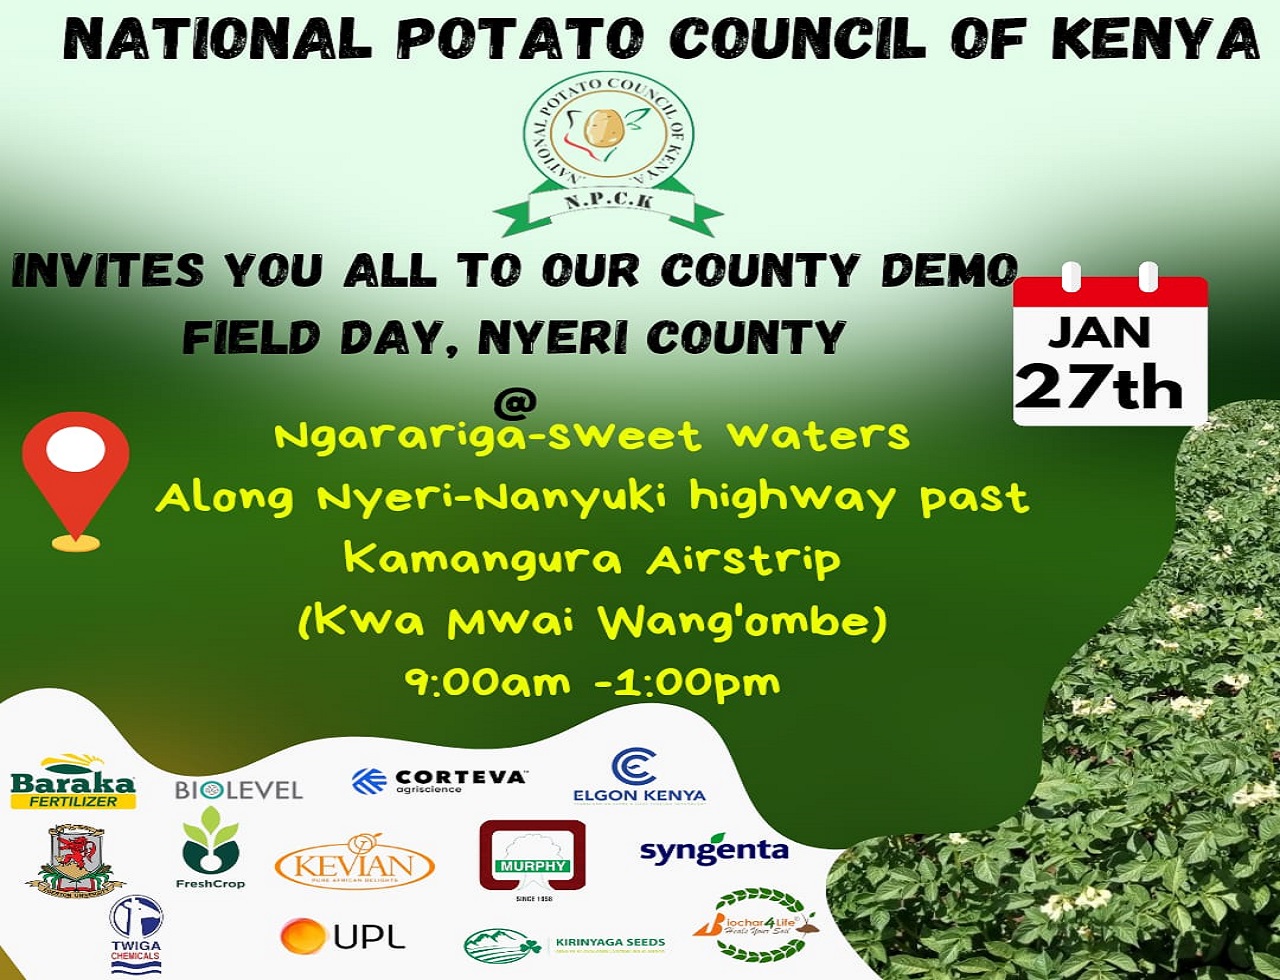 An invitation to Field Days for training farmers in potato production